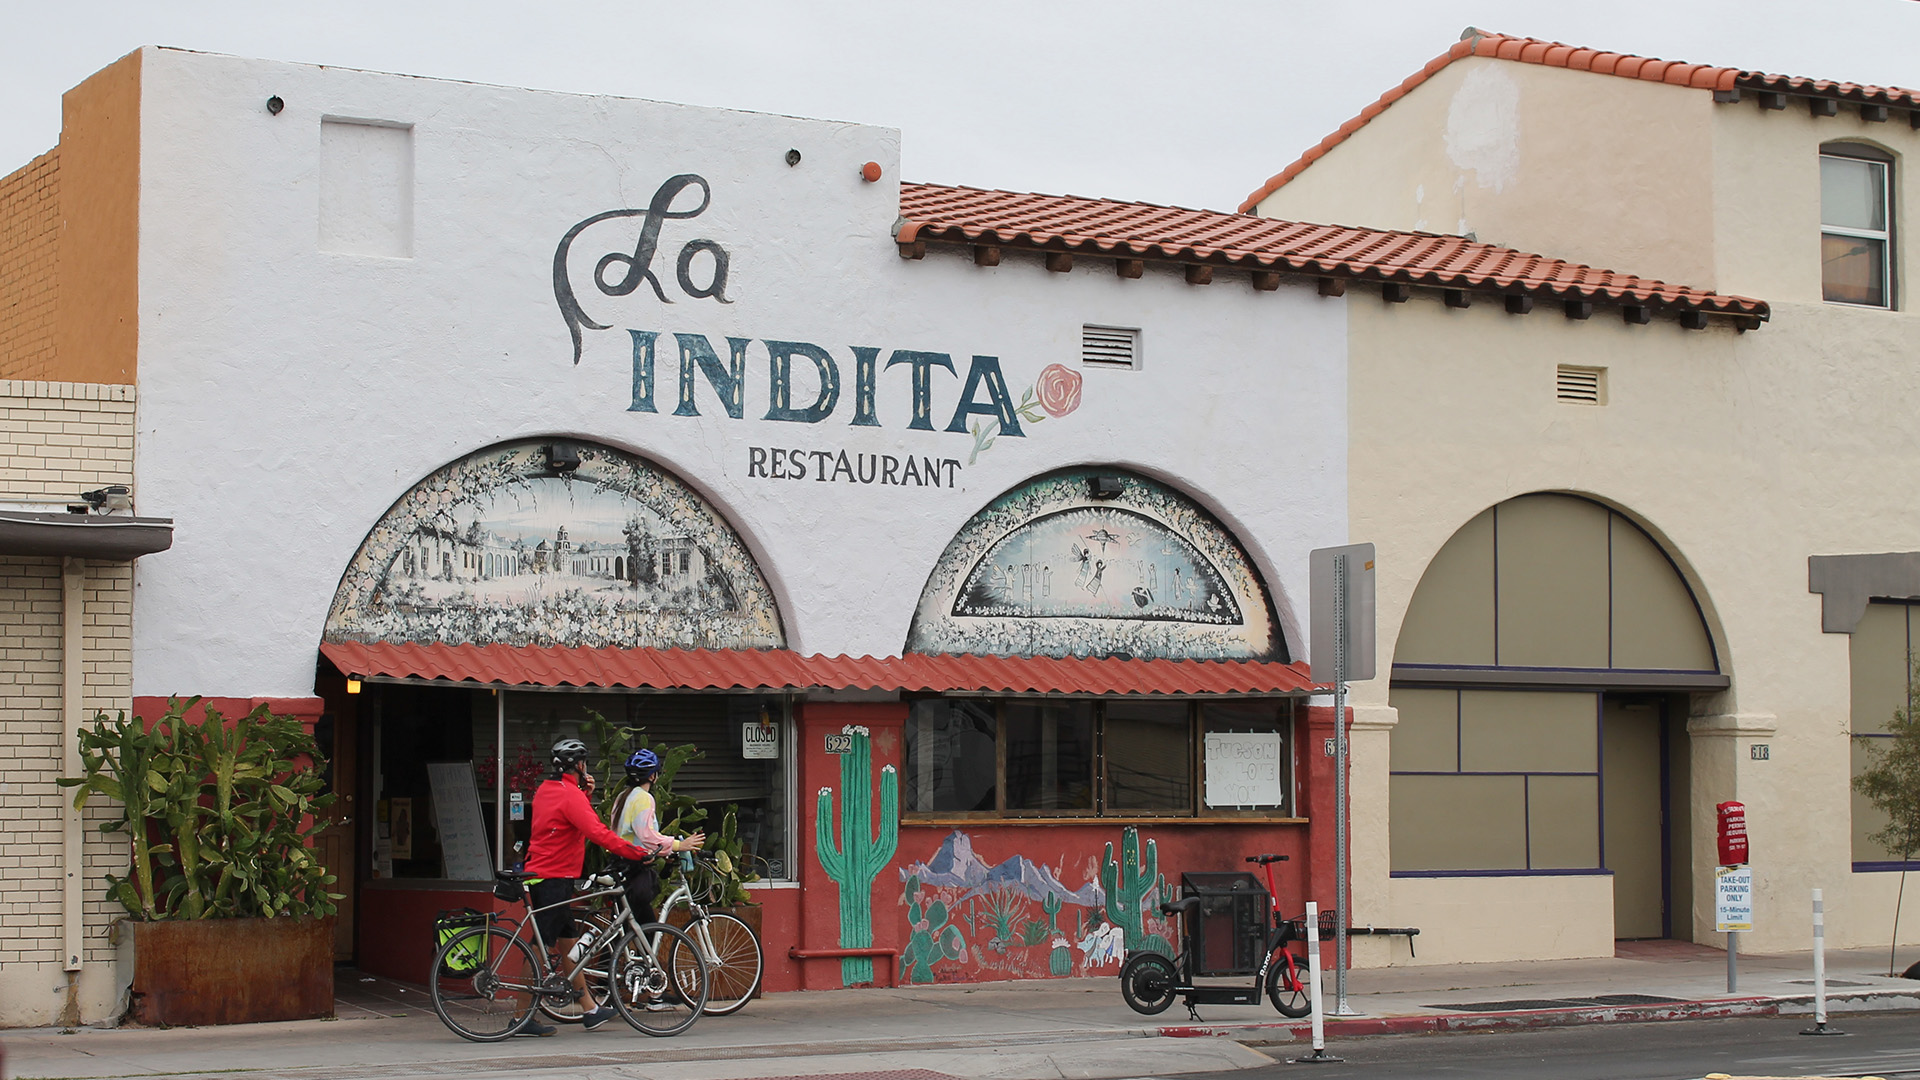 La Indita moved to the 622 N. Fourth Ave. location in 1985.